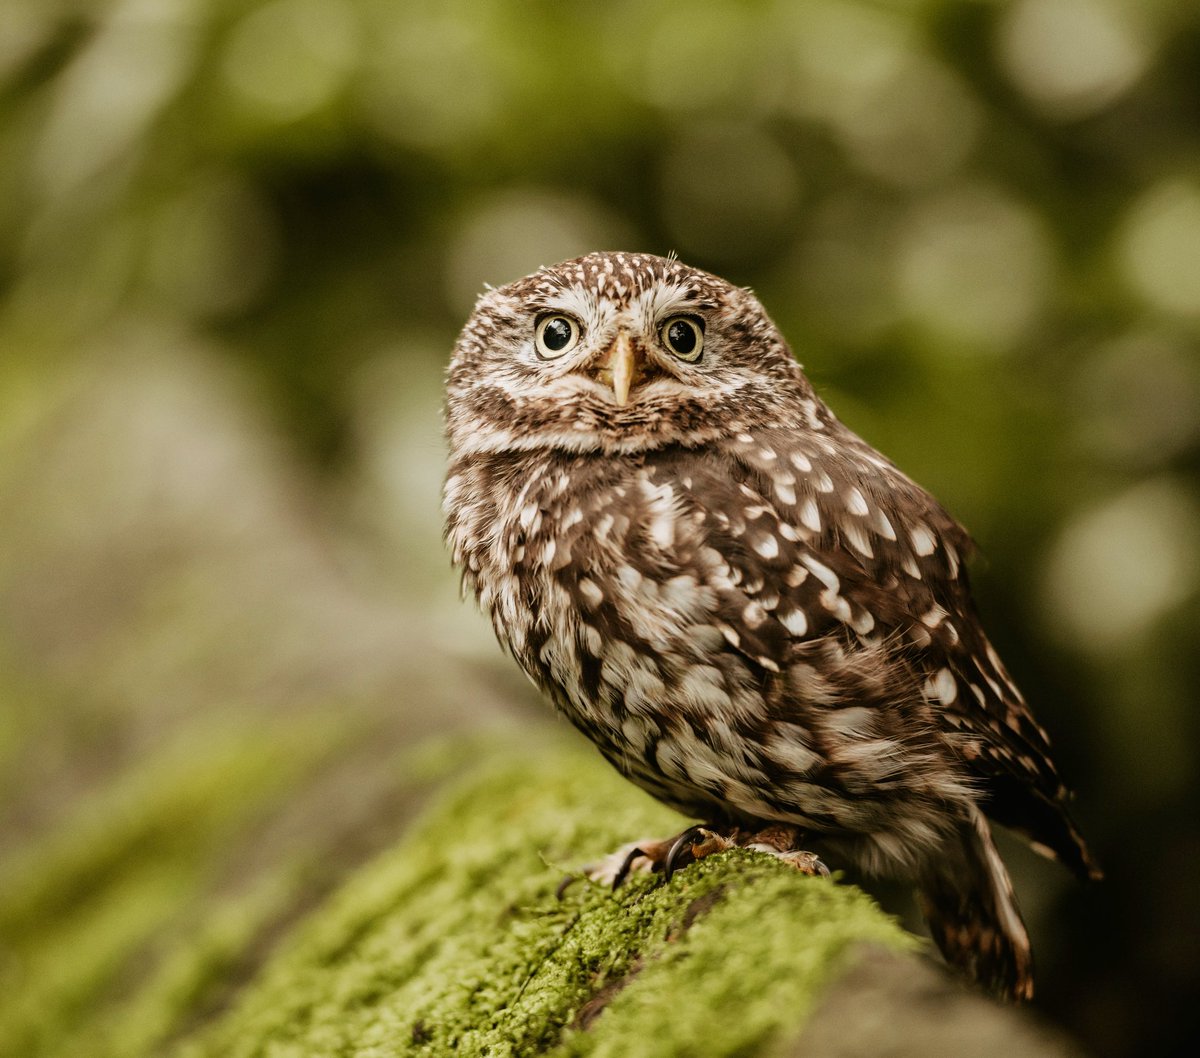 A recent image of mine of a little owl! Love photographing wildlife, but seldom get the opportunity to do it! 📸